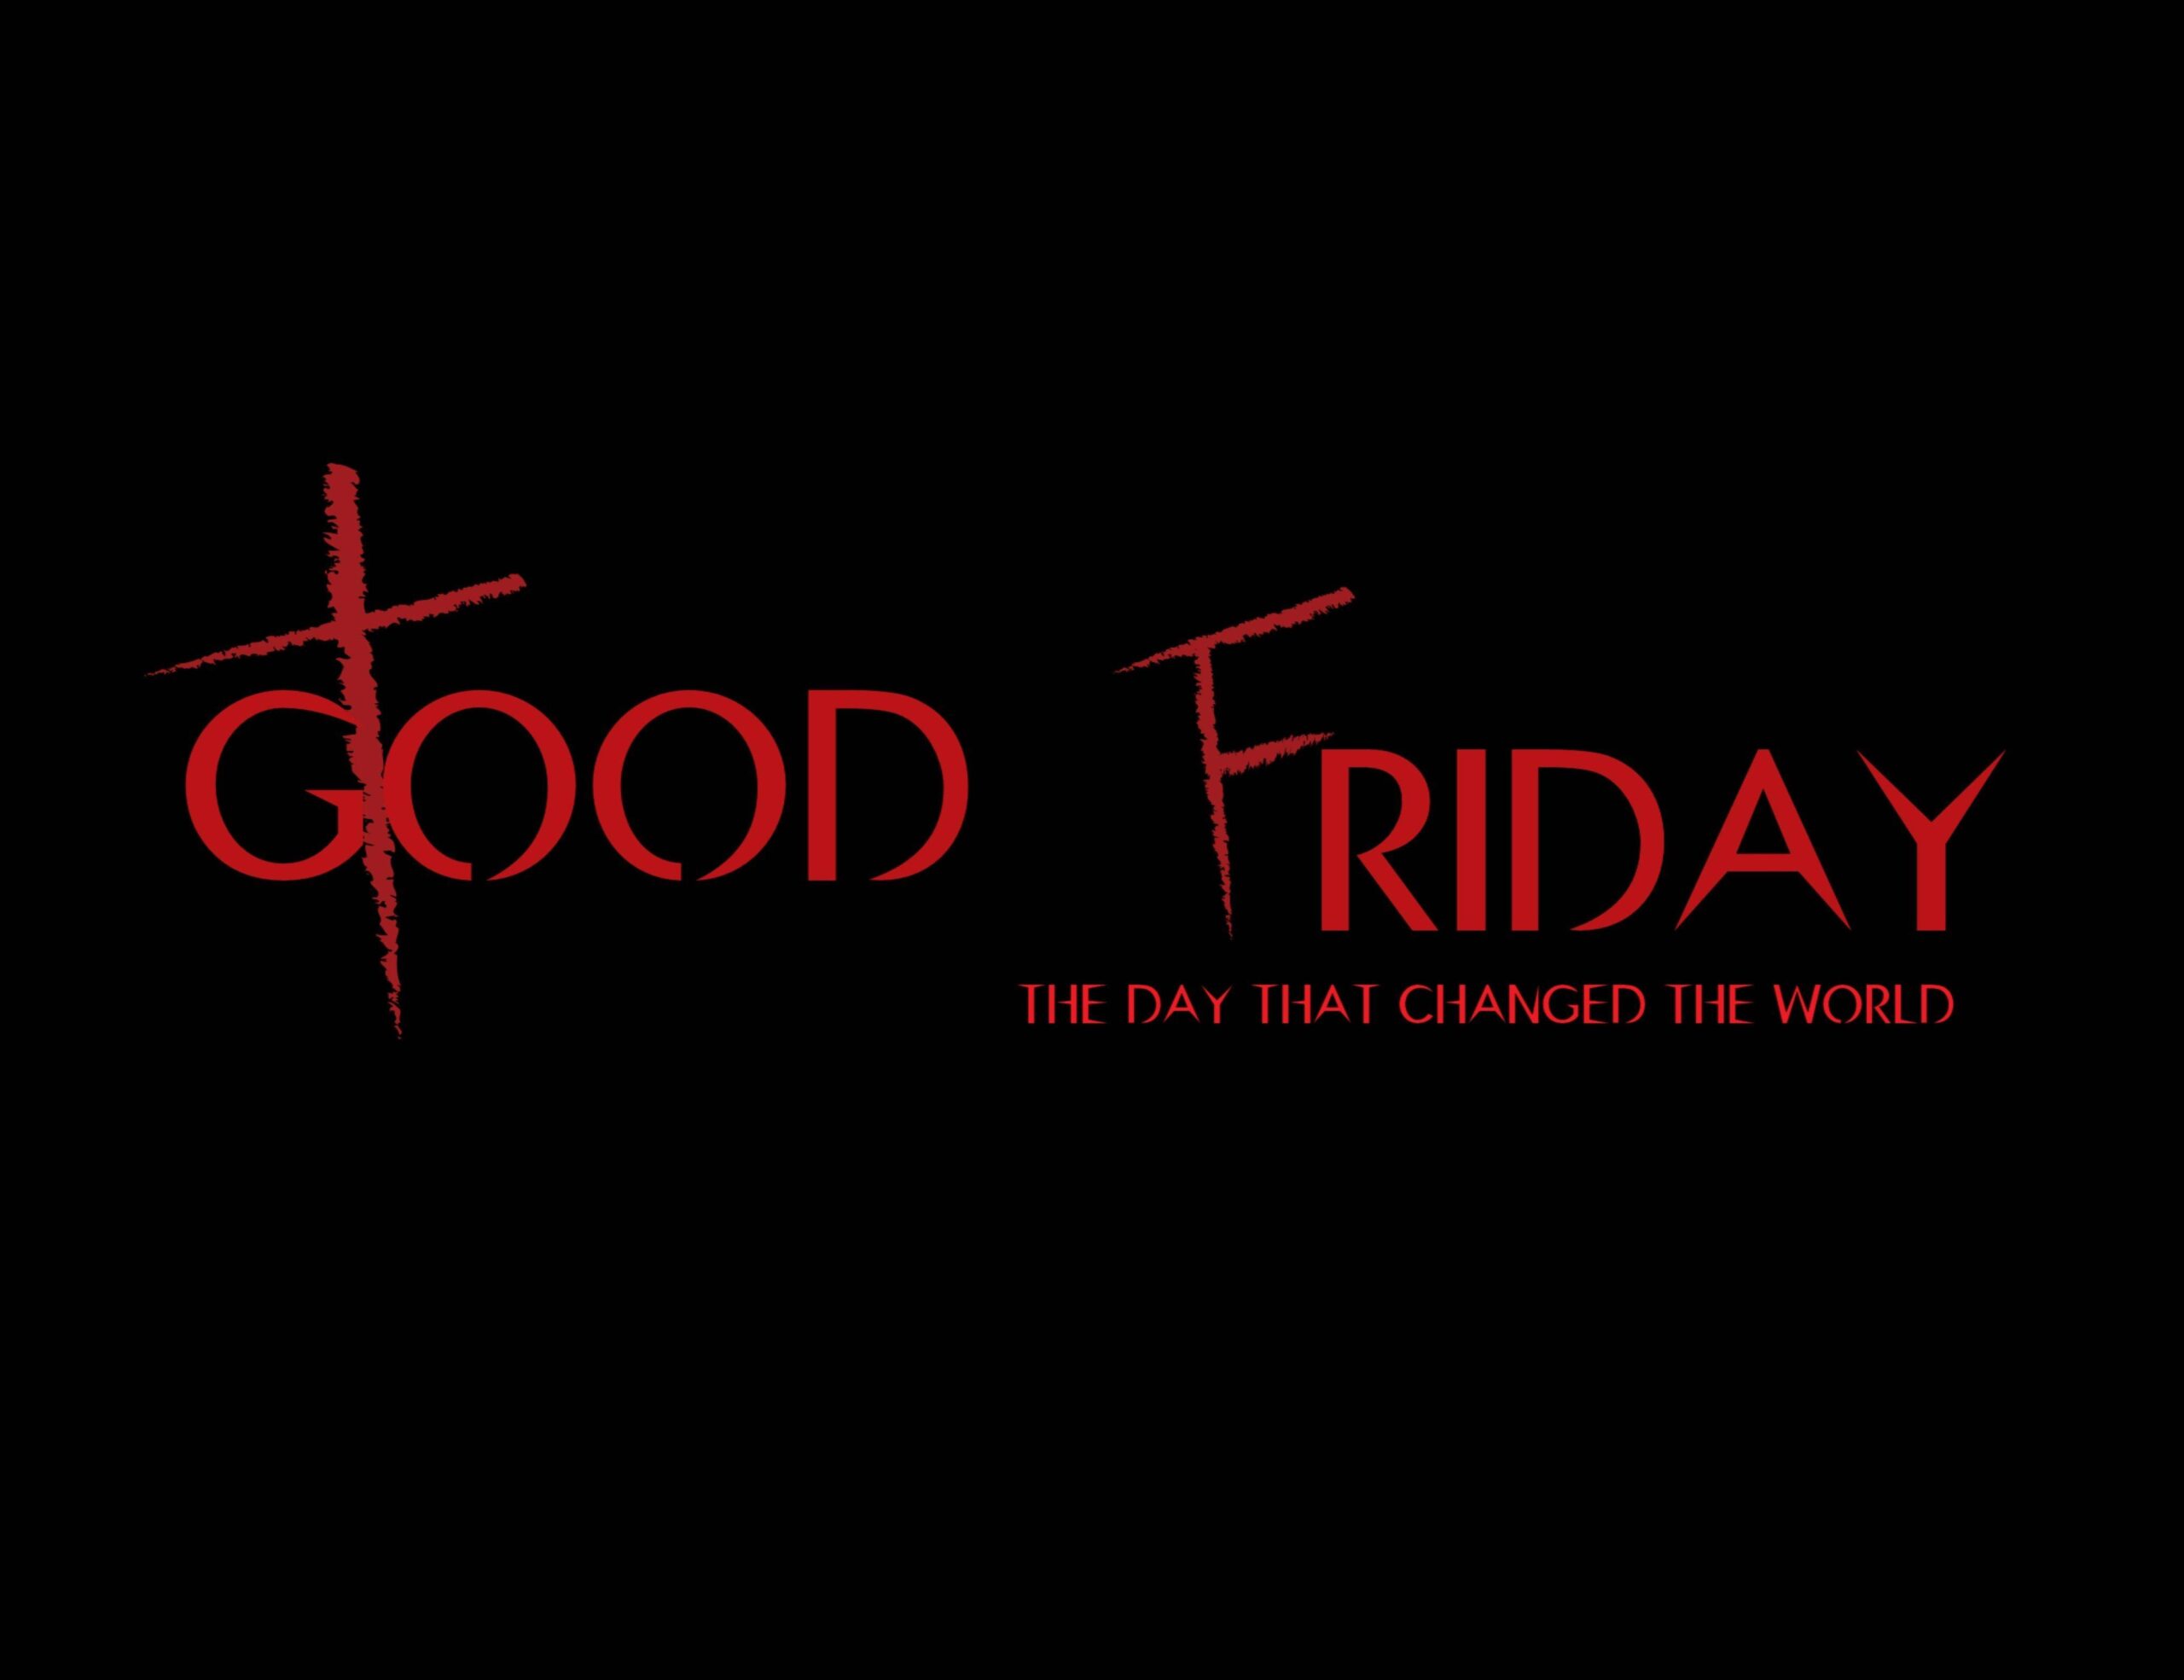 Good Friday with black backgrounds wishes Wallpaper